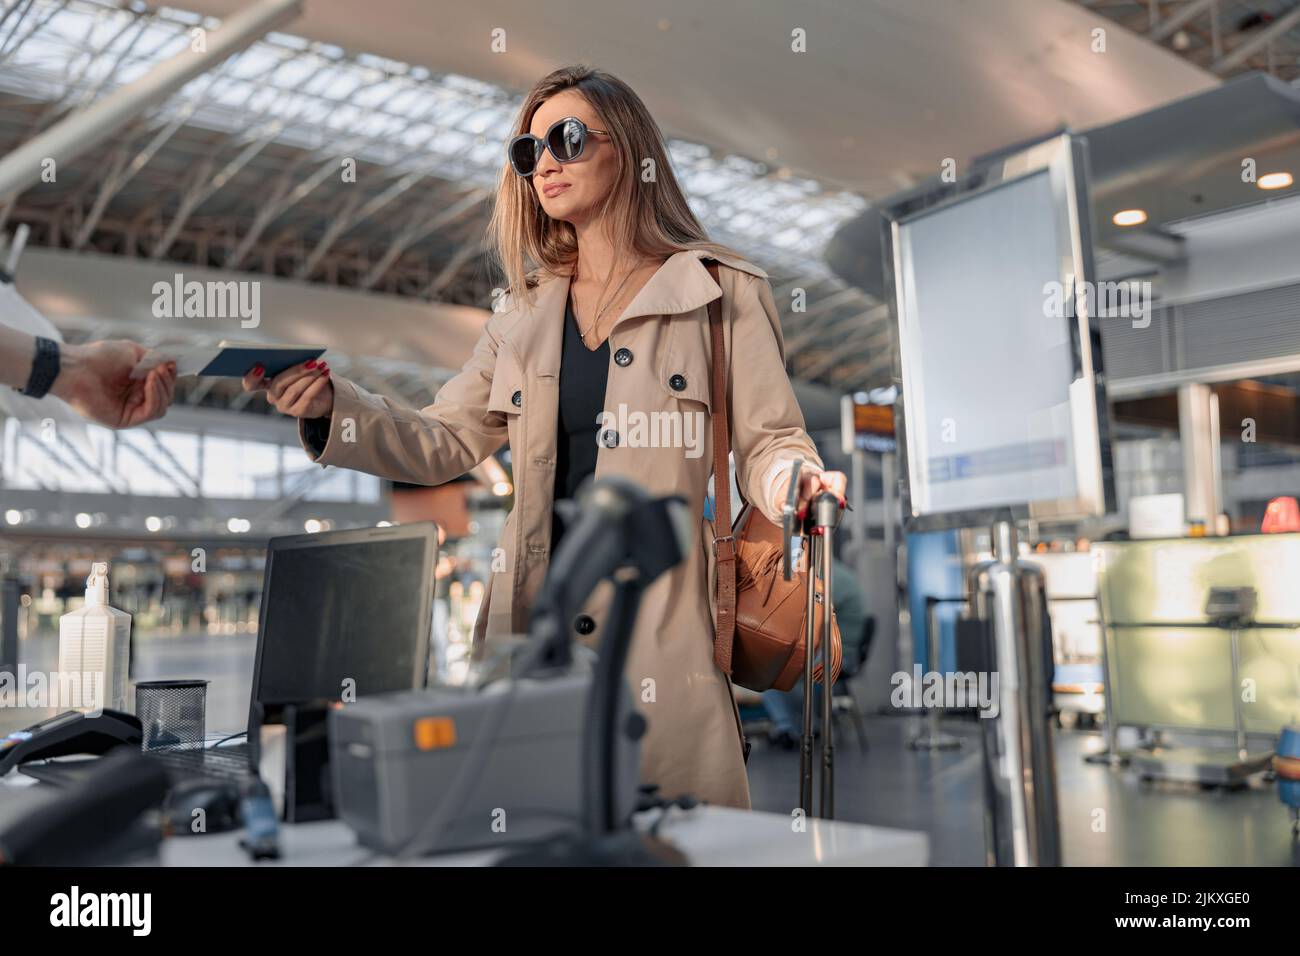 Female traveler giving passport to check at airline service counter Stock Photo